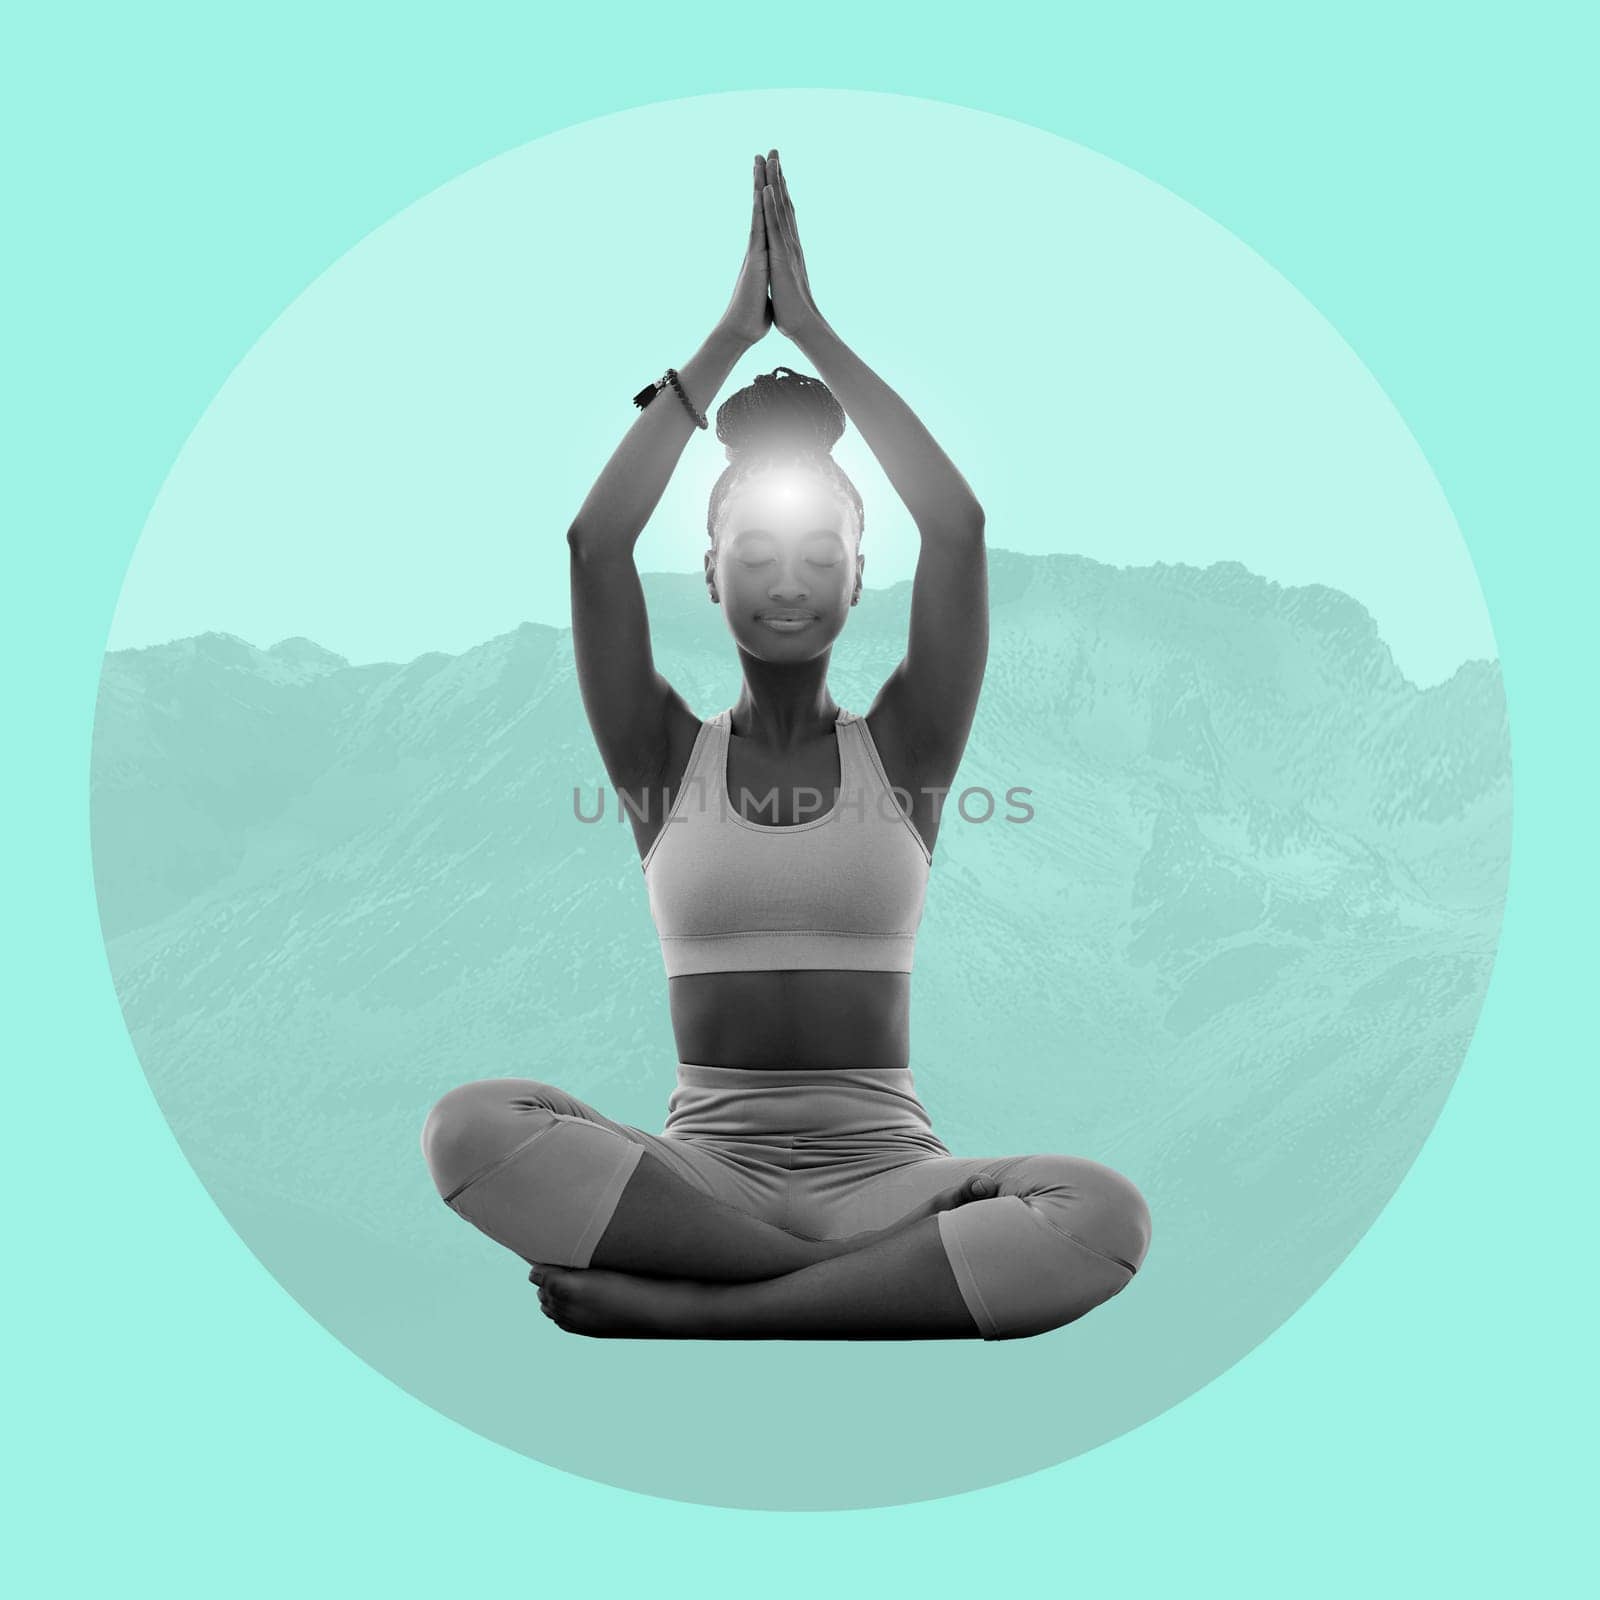 Zen, meditation and black woman on poster, mountain on turquoise background in yoga balance pose. Art, advertising and creative collage design for health, wellness and calm spiritual lifestyle studio.